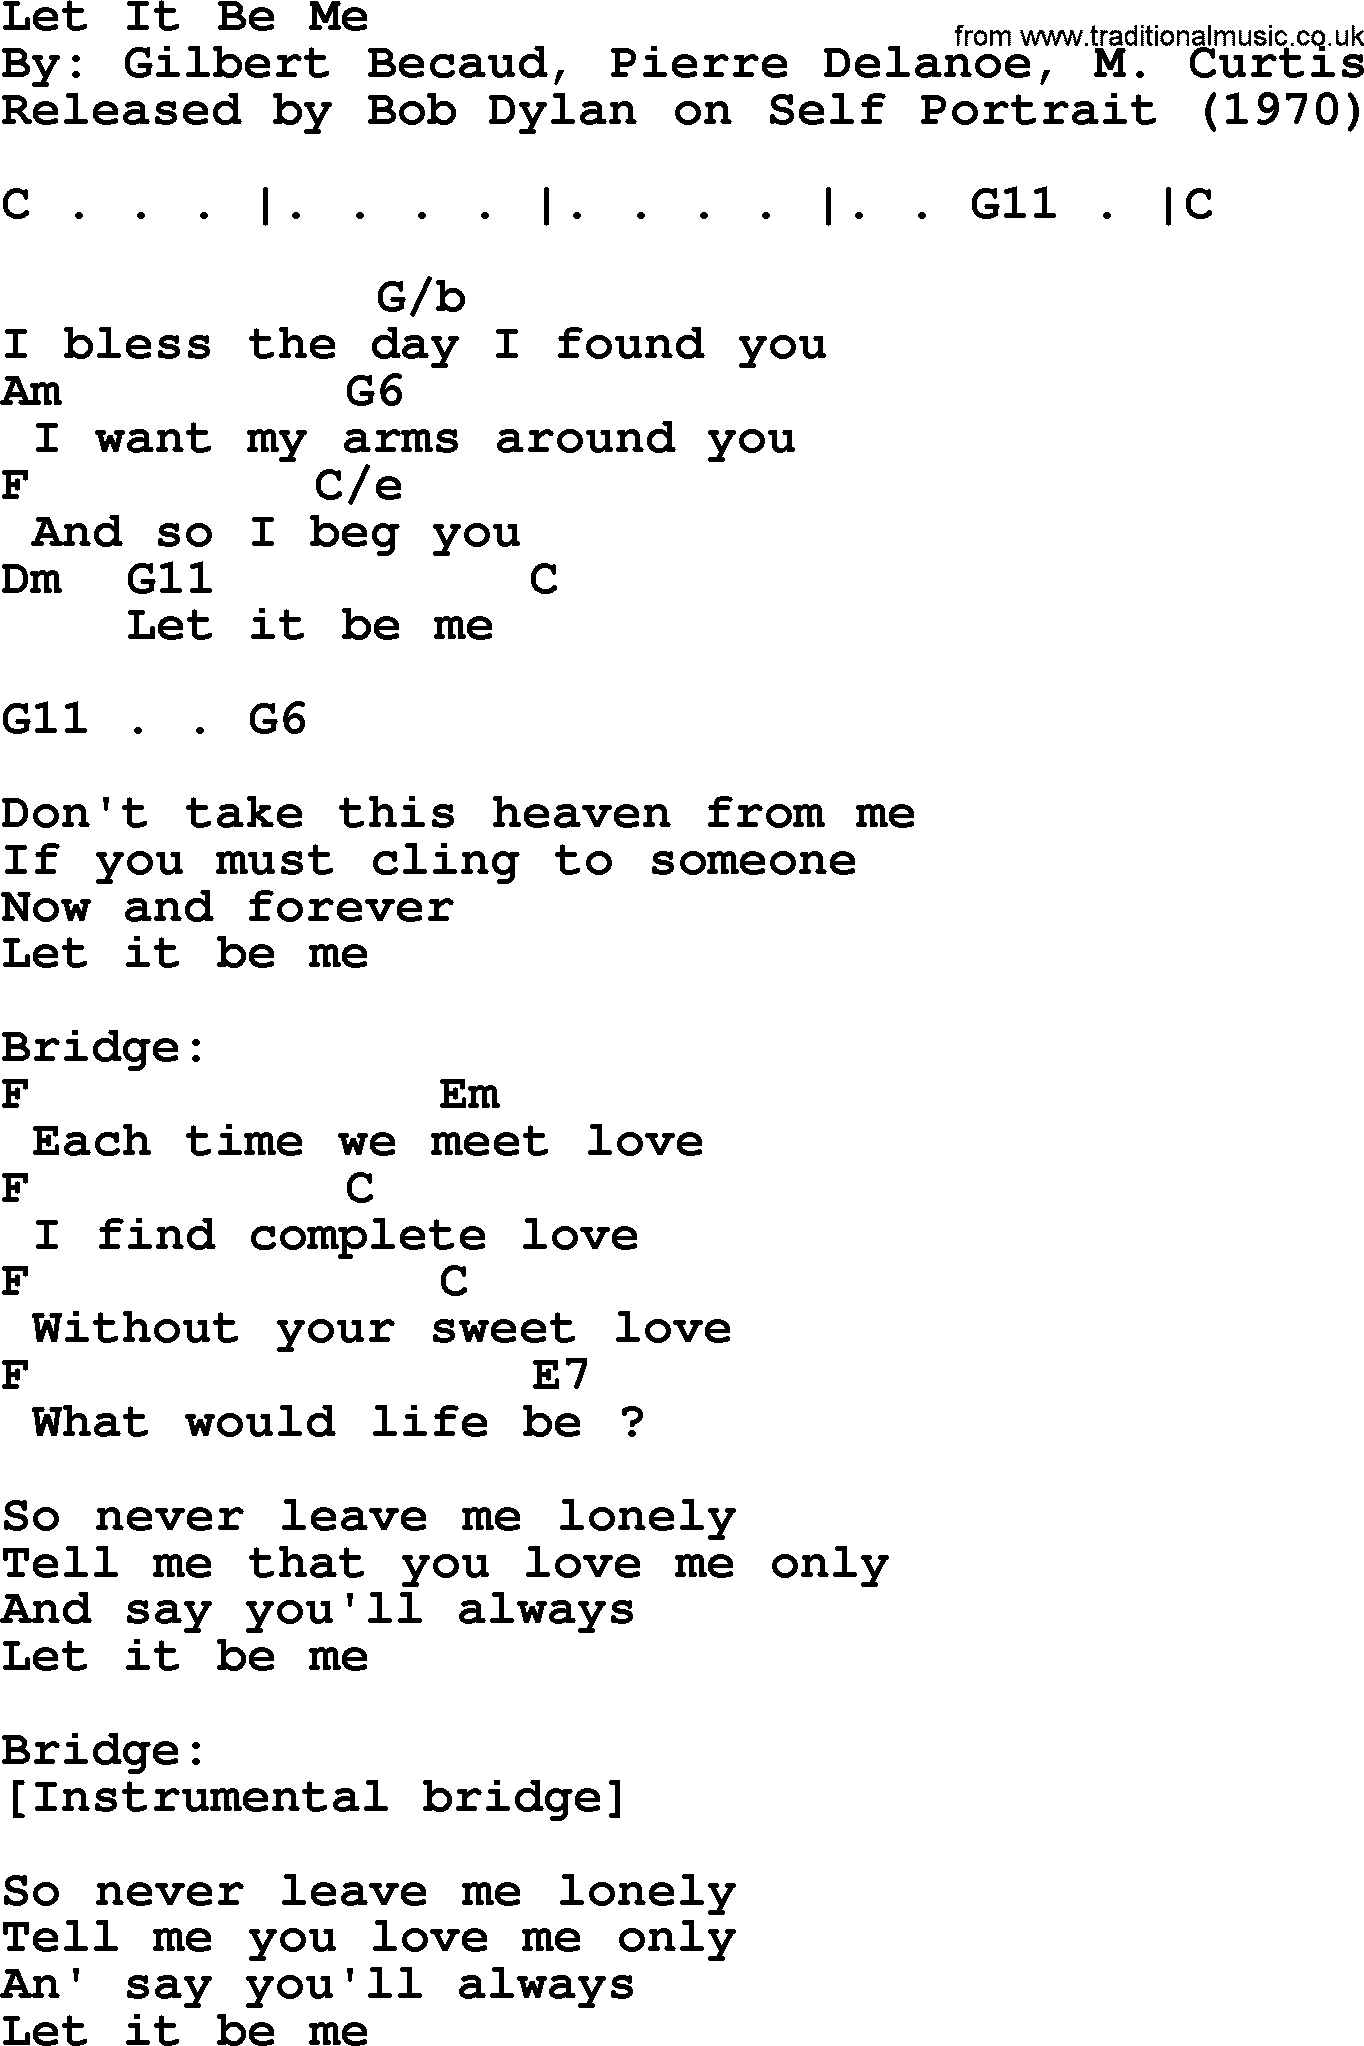 Bob Dylan song, lyrics with chords - Let It Be Me